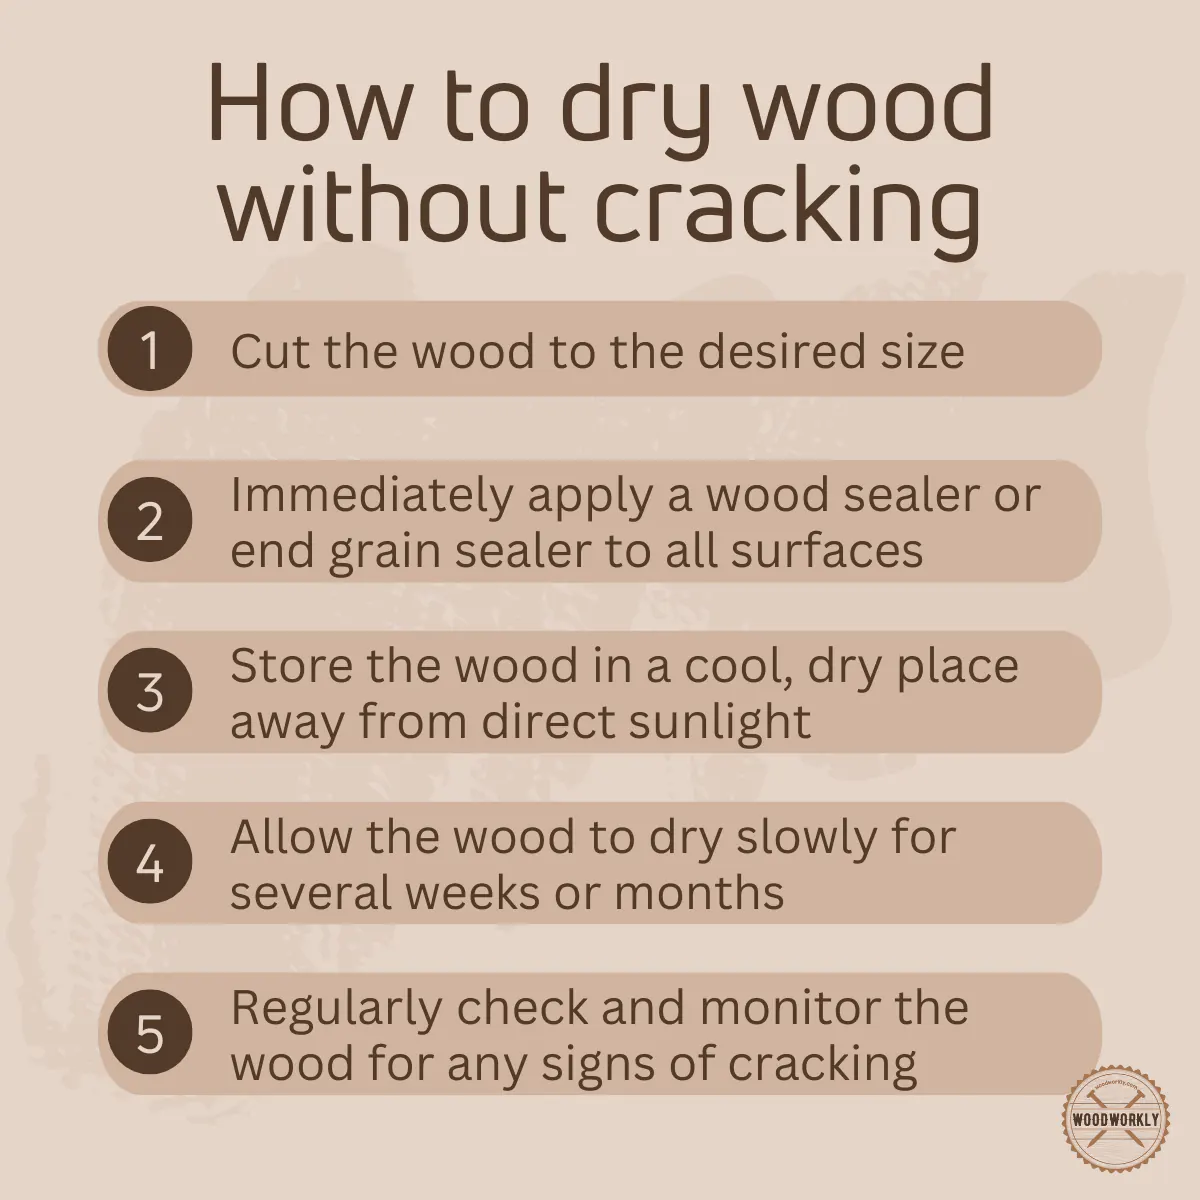 How to dry wood without cracking